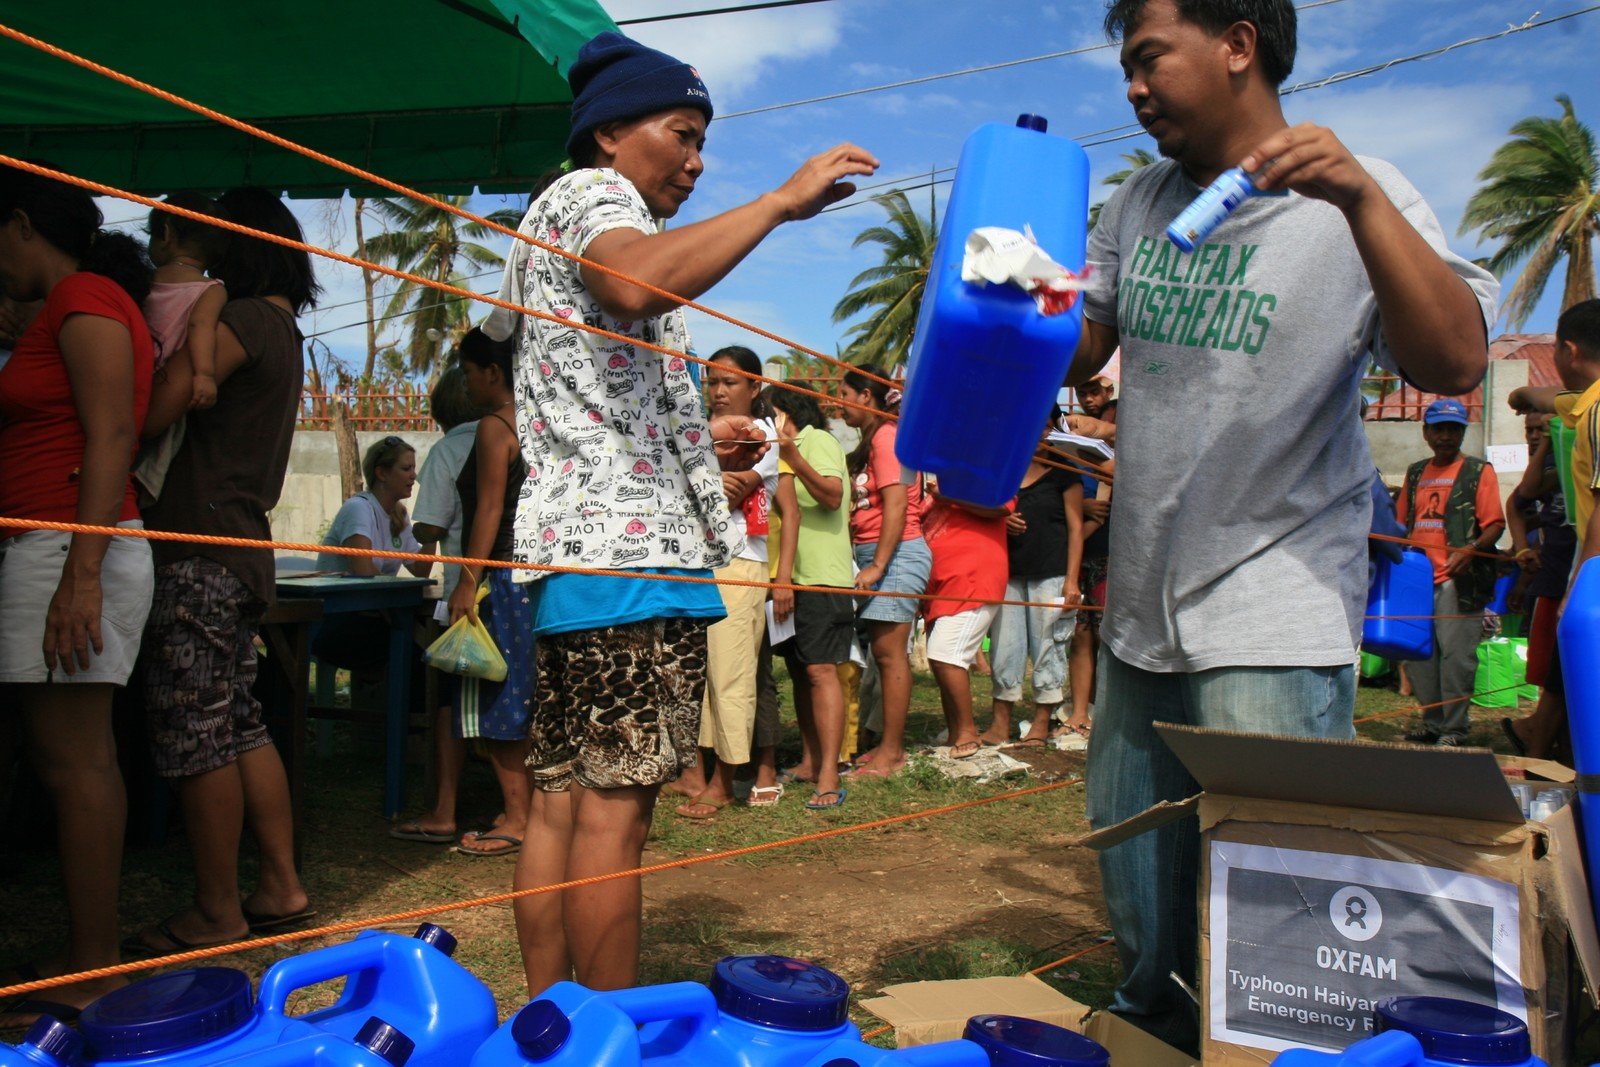 Oxfam Hygiene and water purification kits were given to over 700 families in the coastal region of Daanbantayan over two days.